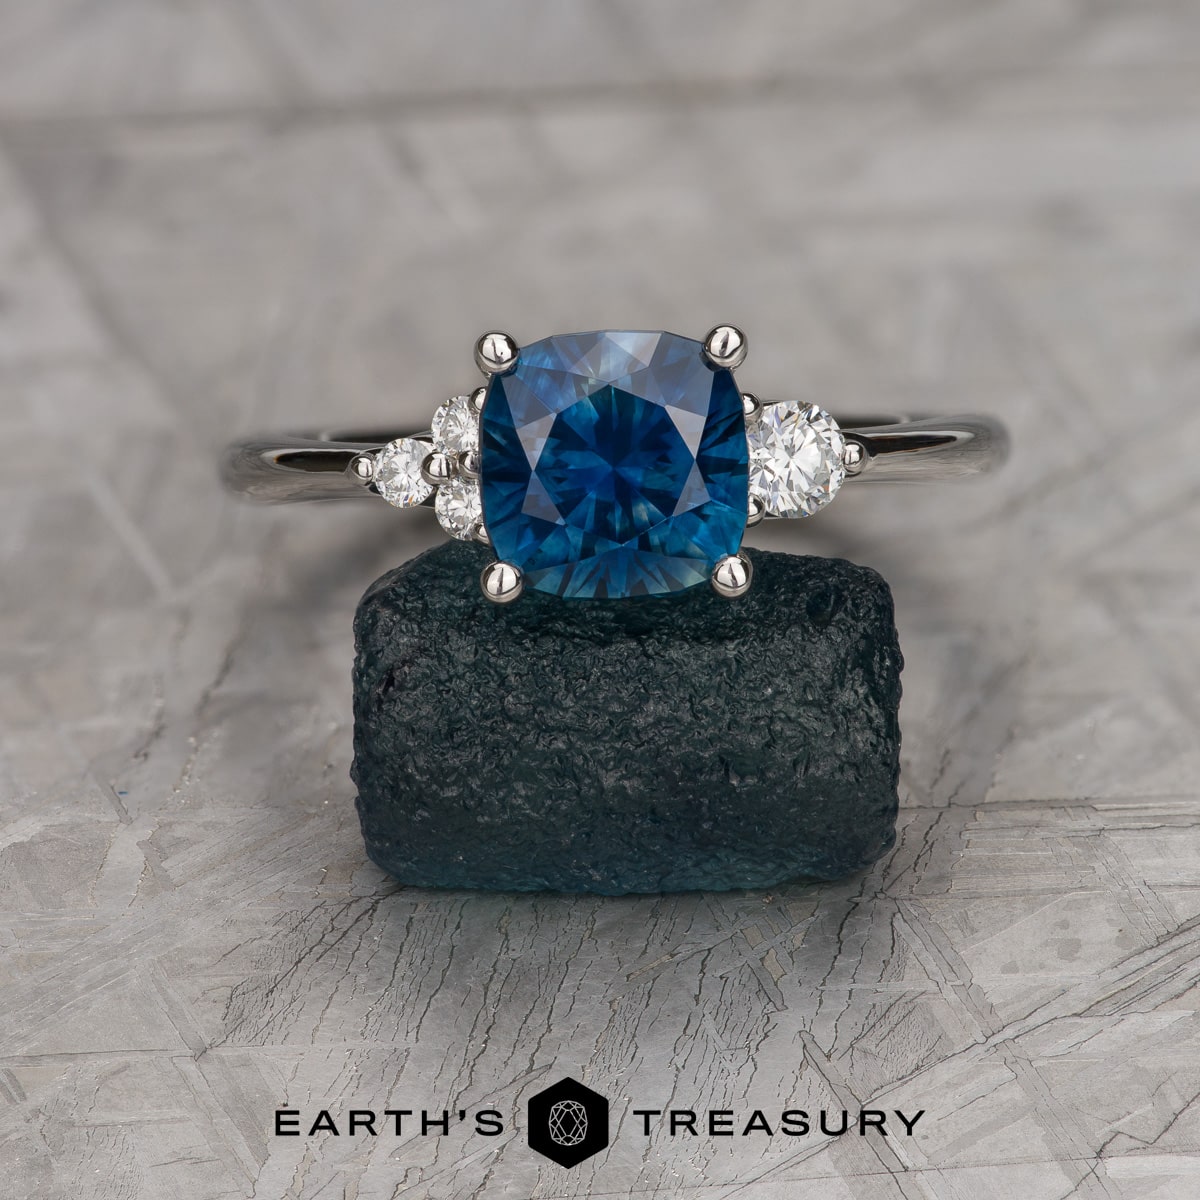 The "Erythia" in Platinum with 1.89-Carat Montana Sapphire